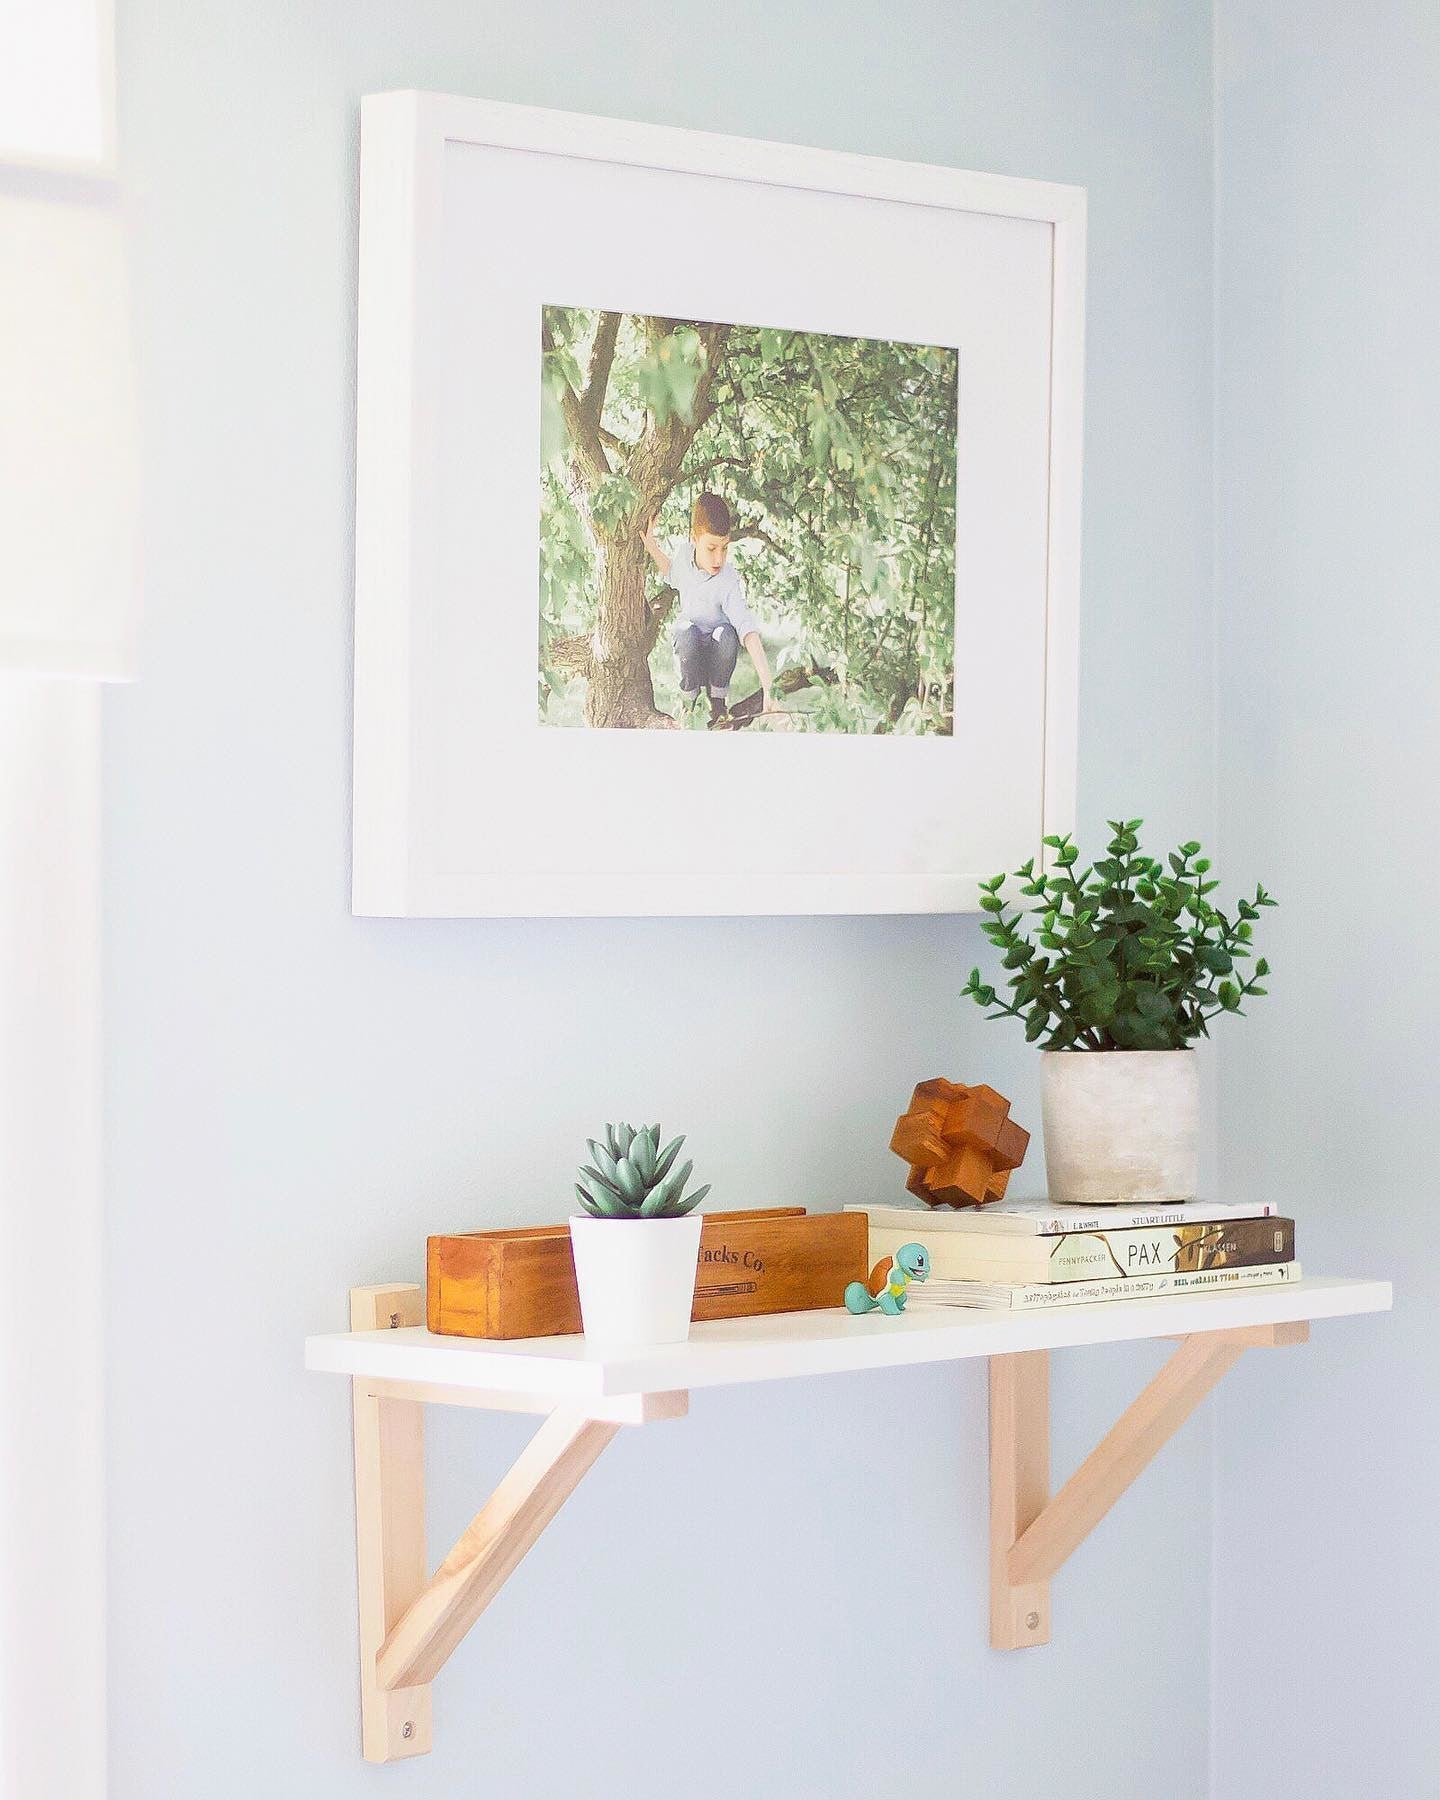 Photo Print on Display in a White Frame